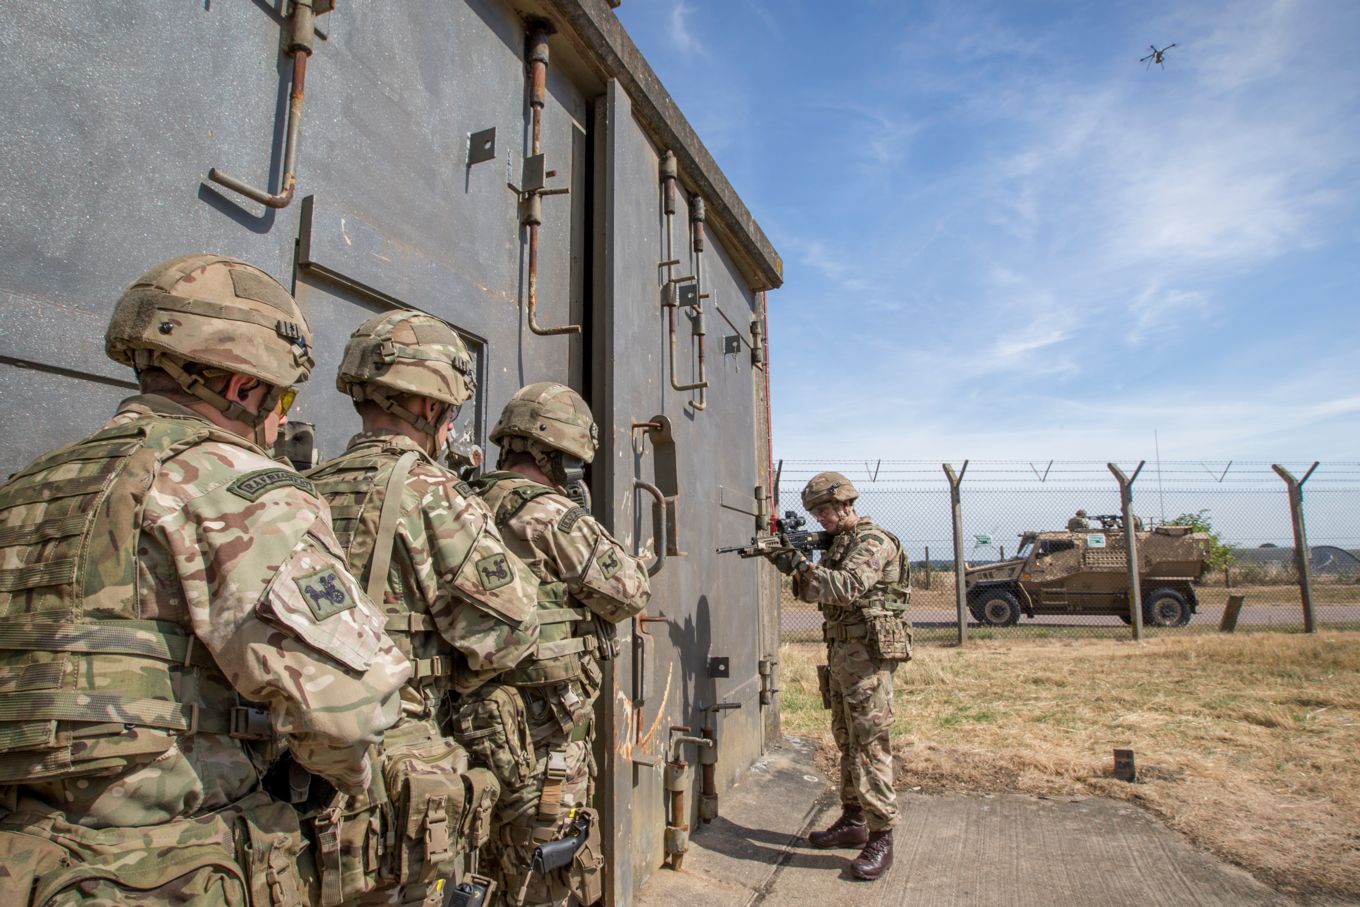 The RAF Regiment and the fighting force of the Royal Air Force, and take on key responsibilities in Force Protection, defending airfields, RAF Personnel and RAF Assets including aircraft, vehicles and infrastructure